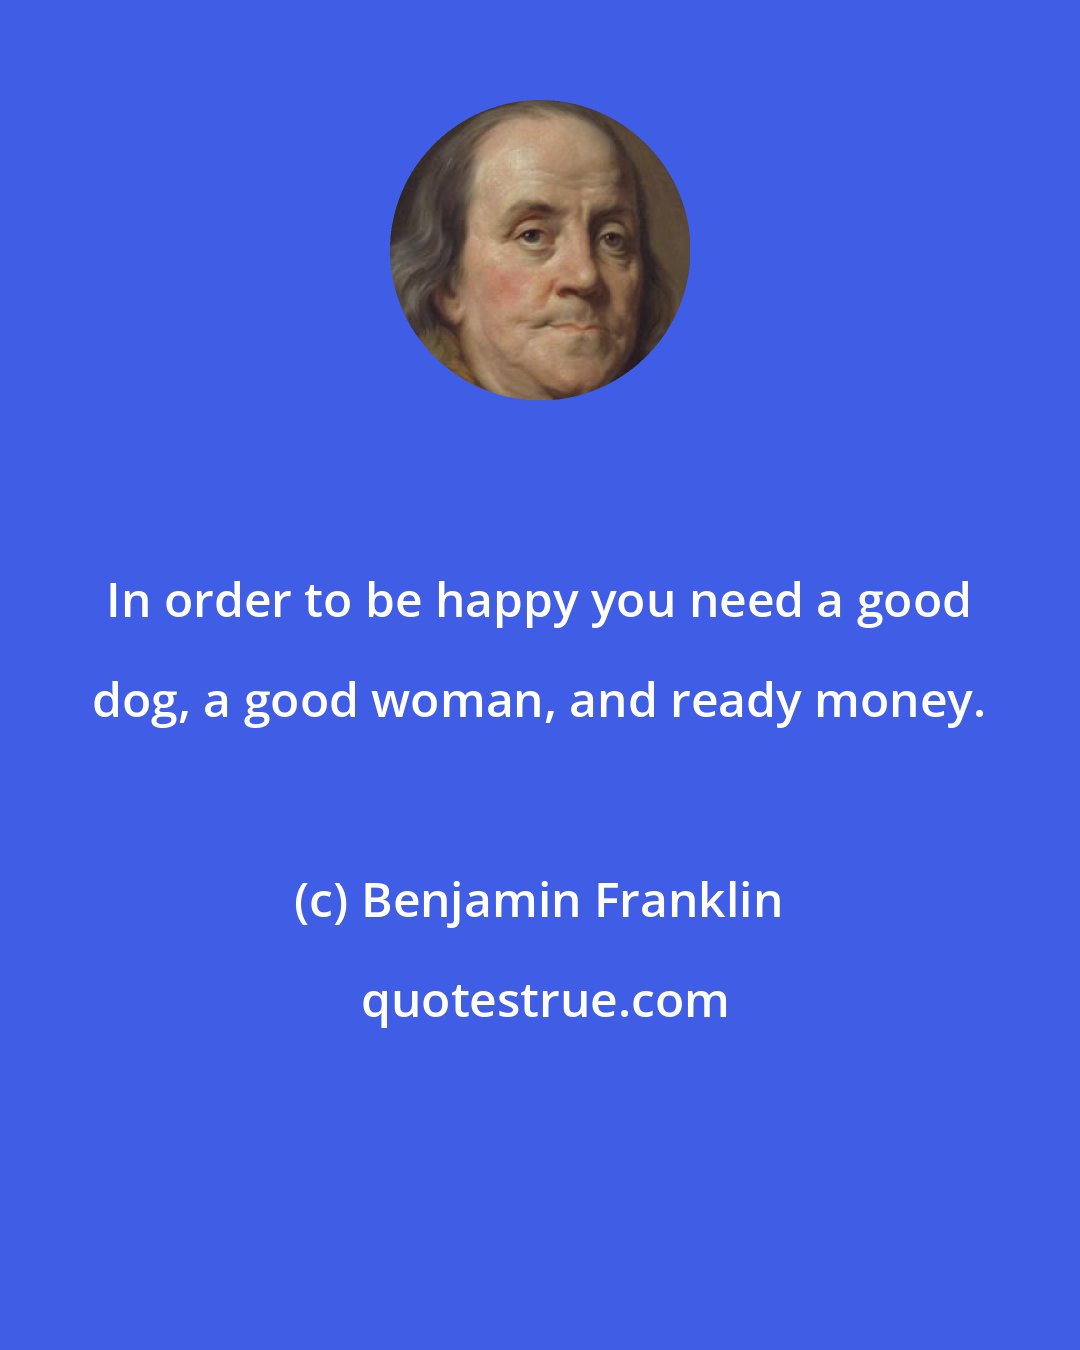 Benjamin Franklin: In order to be happy you need a good dog, a good woman, and ready money.